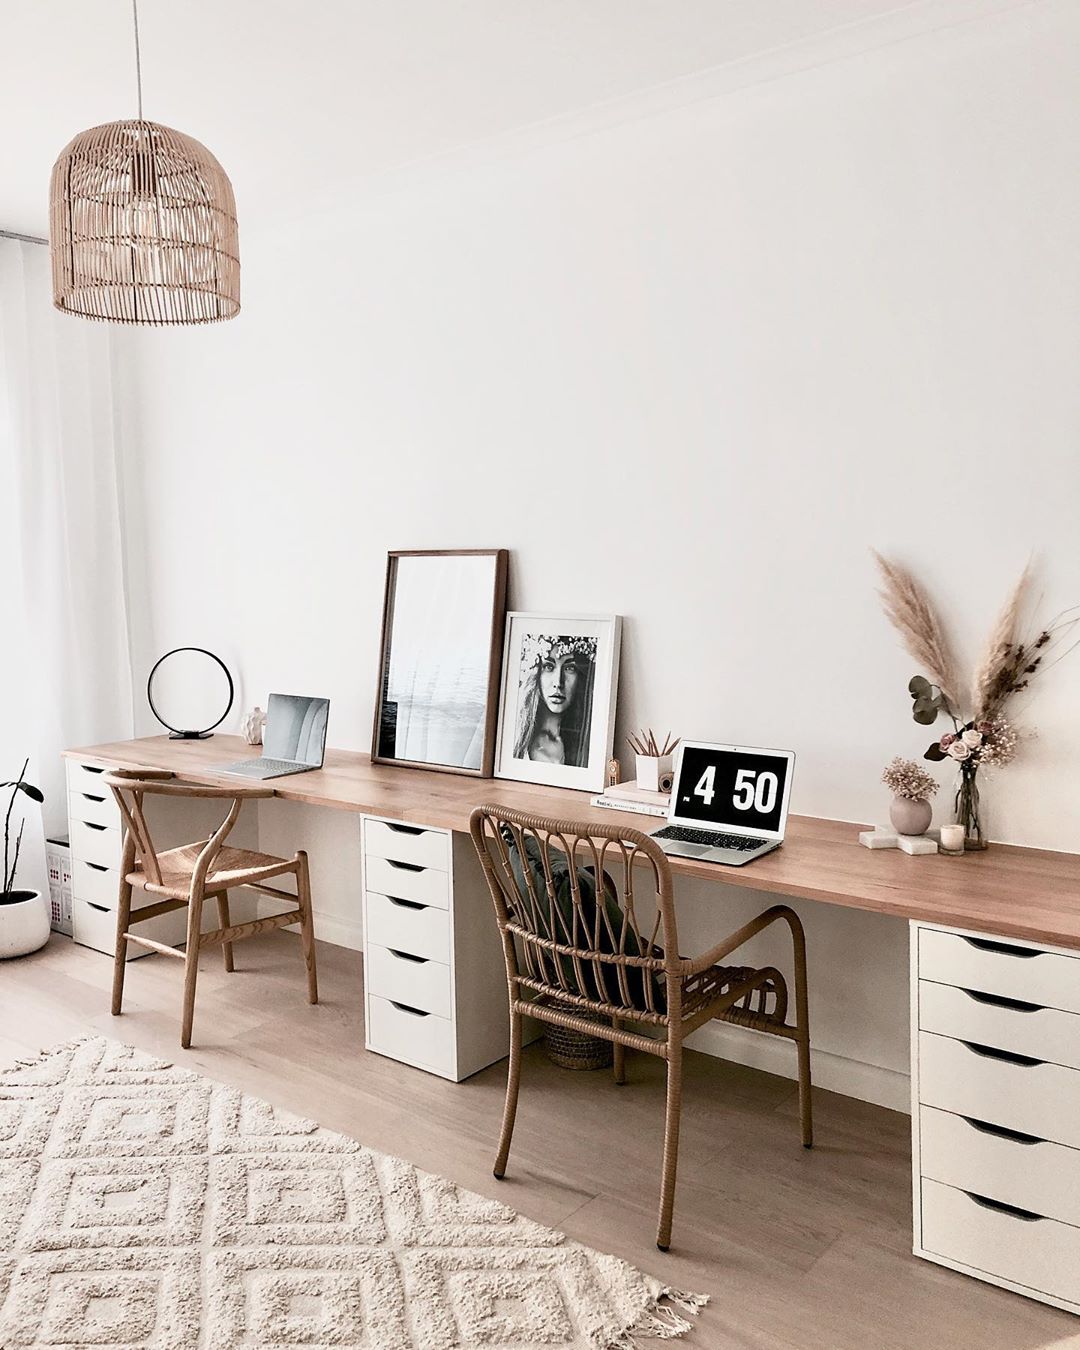 long desk against a wall at home office with wooden chairs photo by Instagram user @life.with.aria.and.charlie